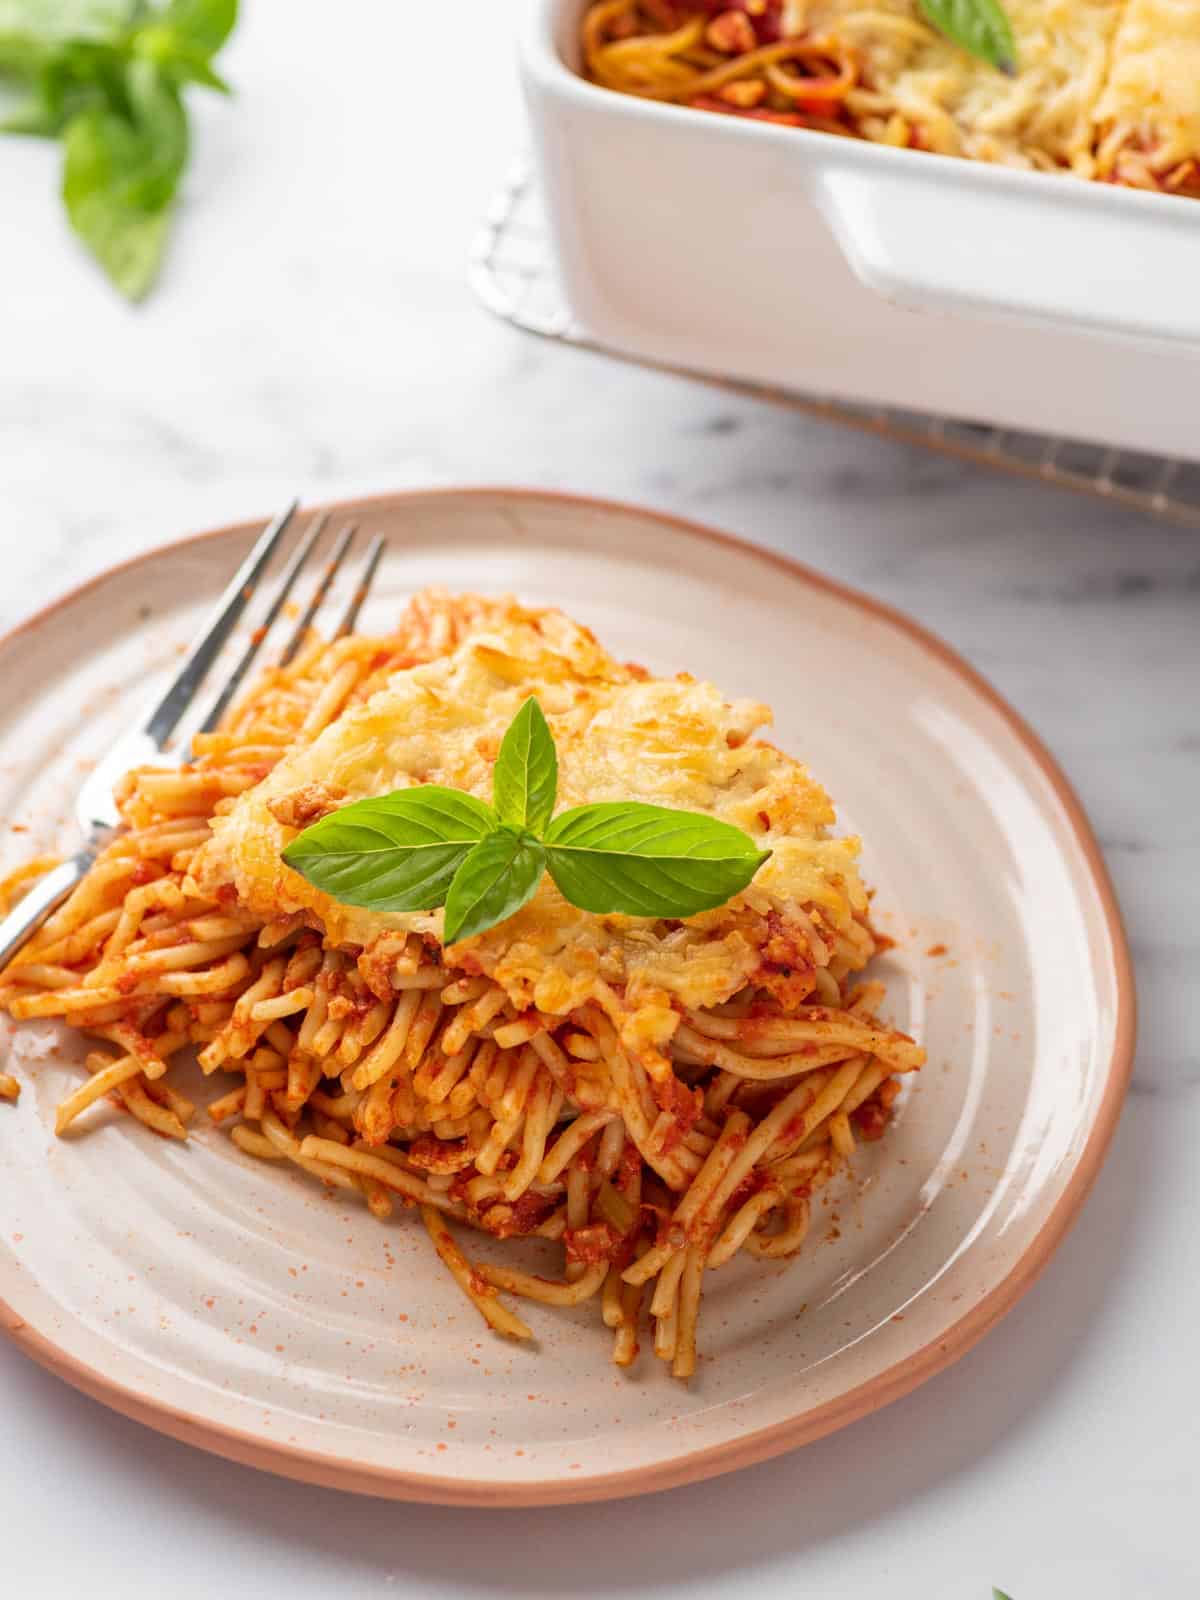 portion of baked spaghetti pasta served on a plate and topped with basil leaves.